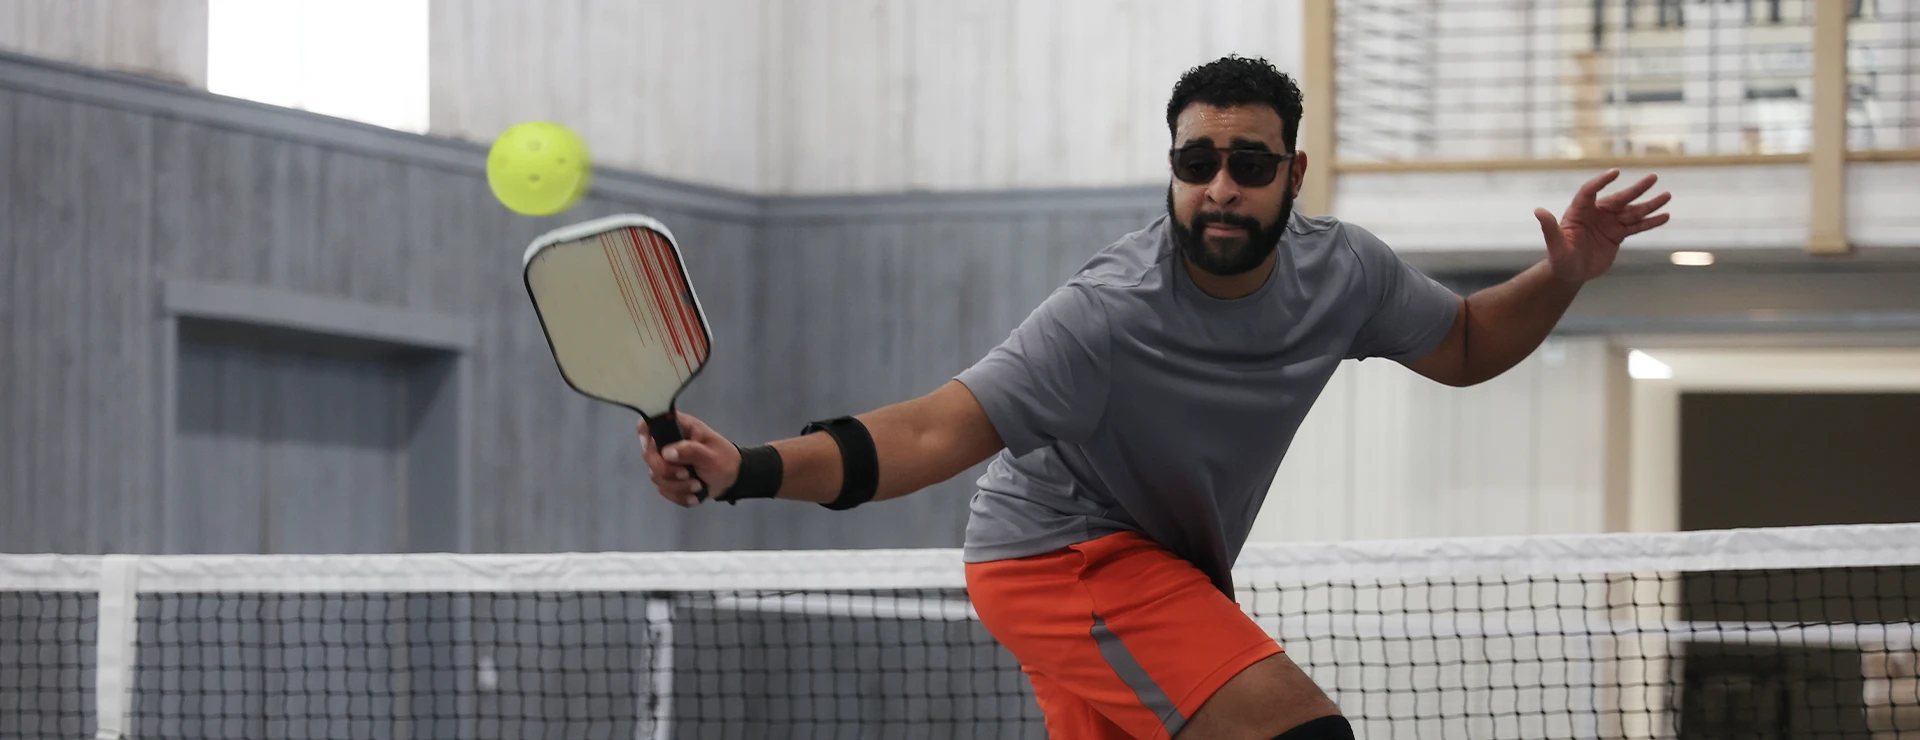 pickleball use case without